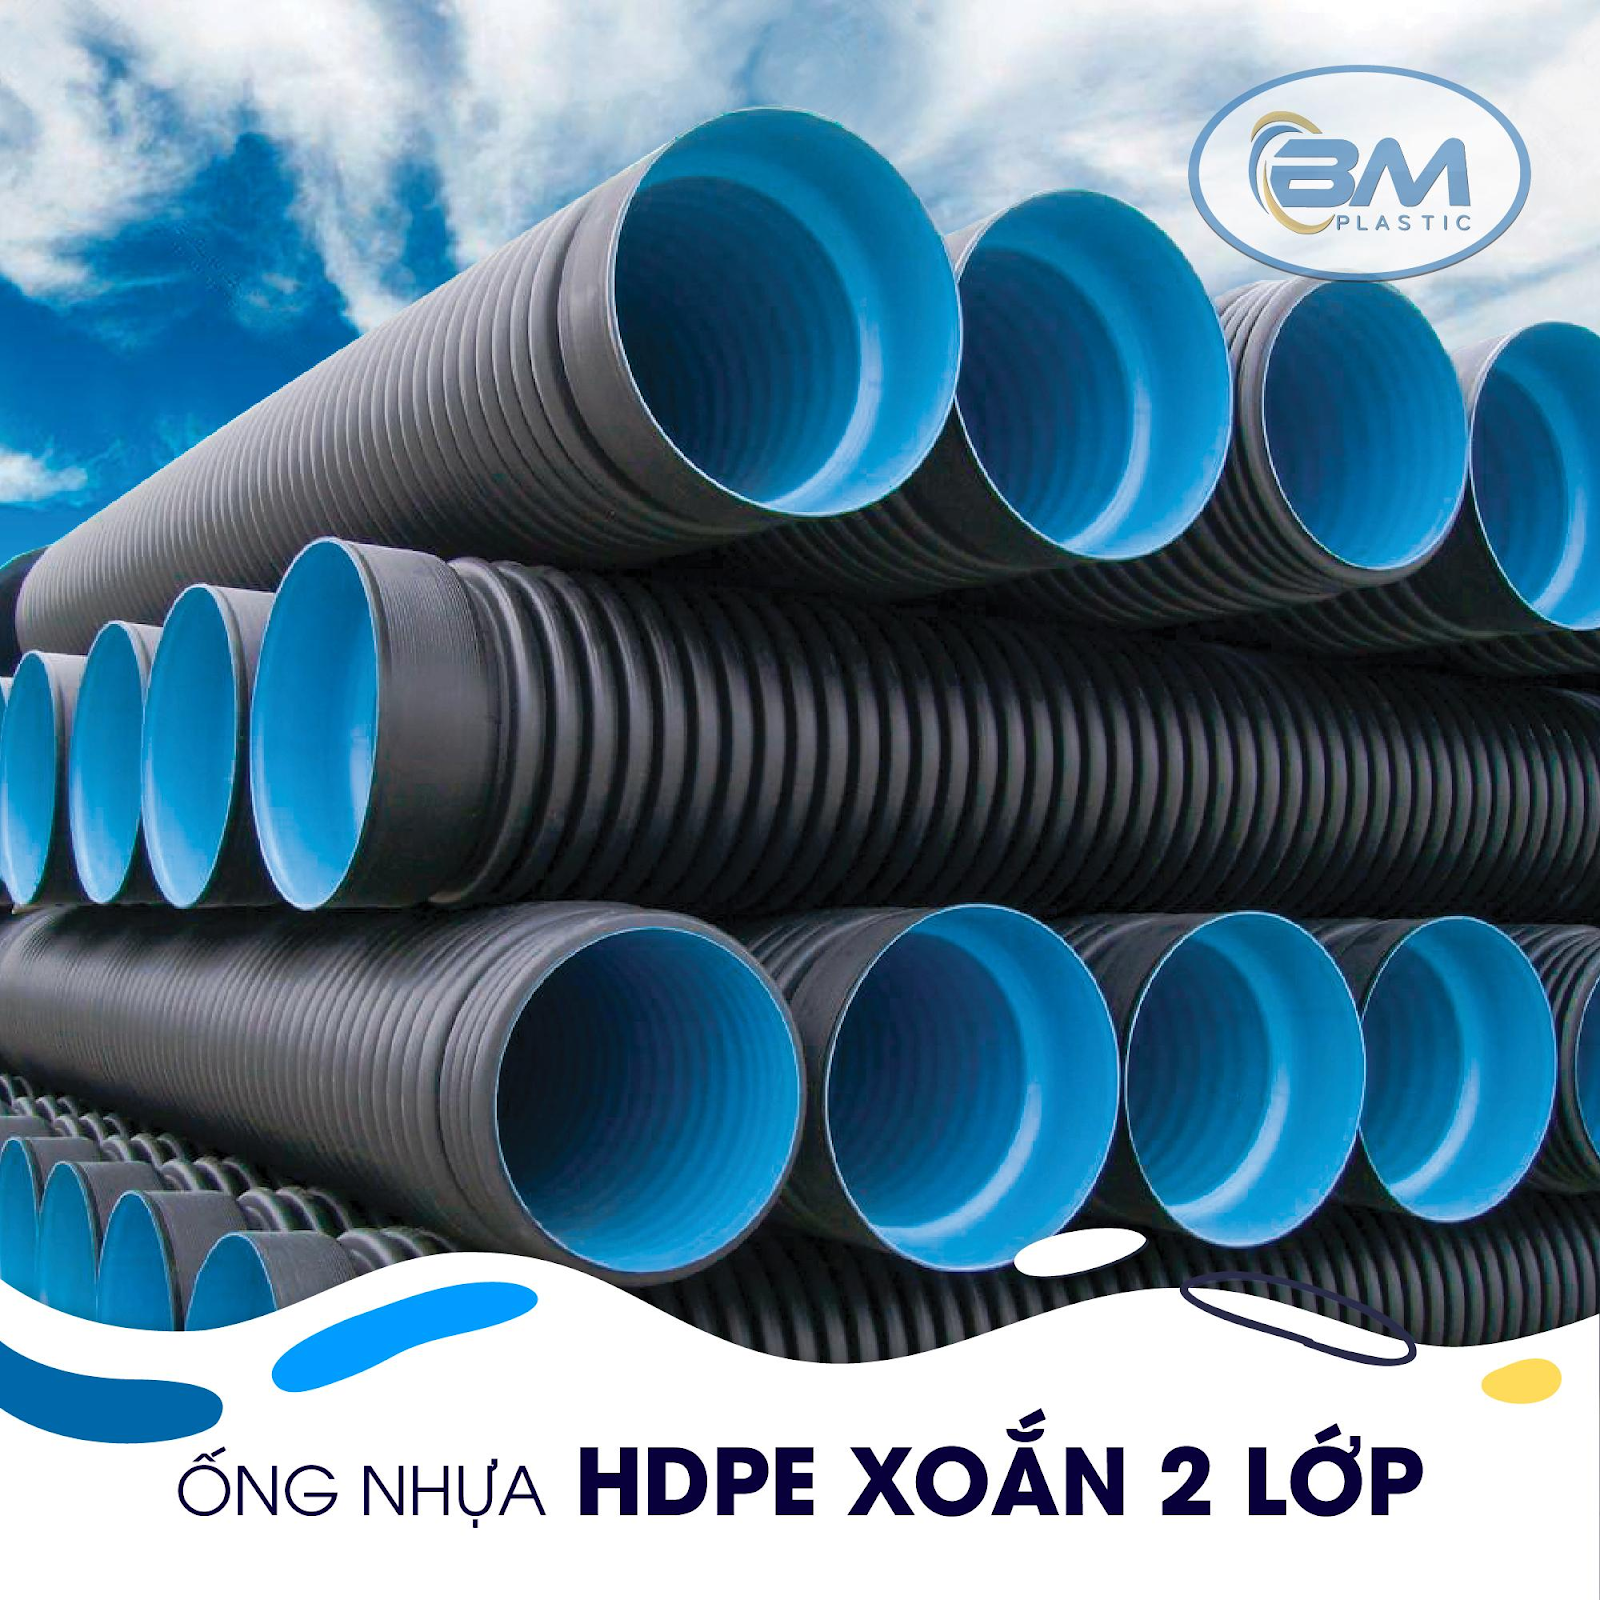 /upload/images/ong-nhua-hdpe-05.png